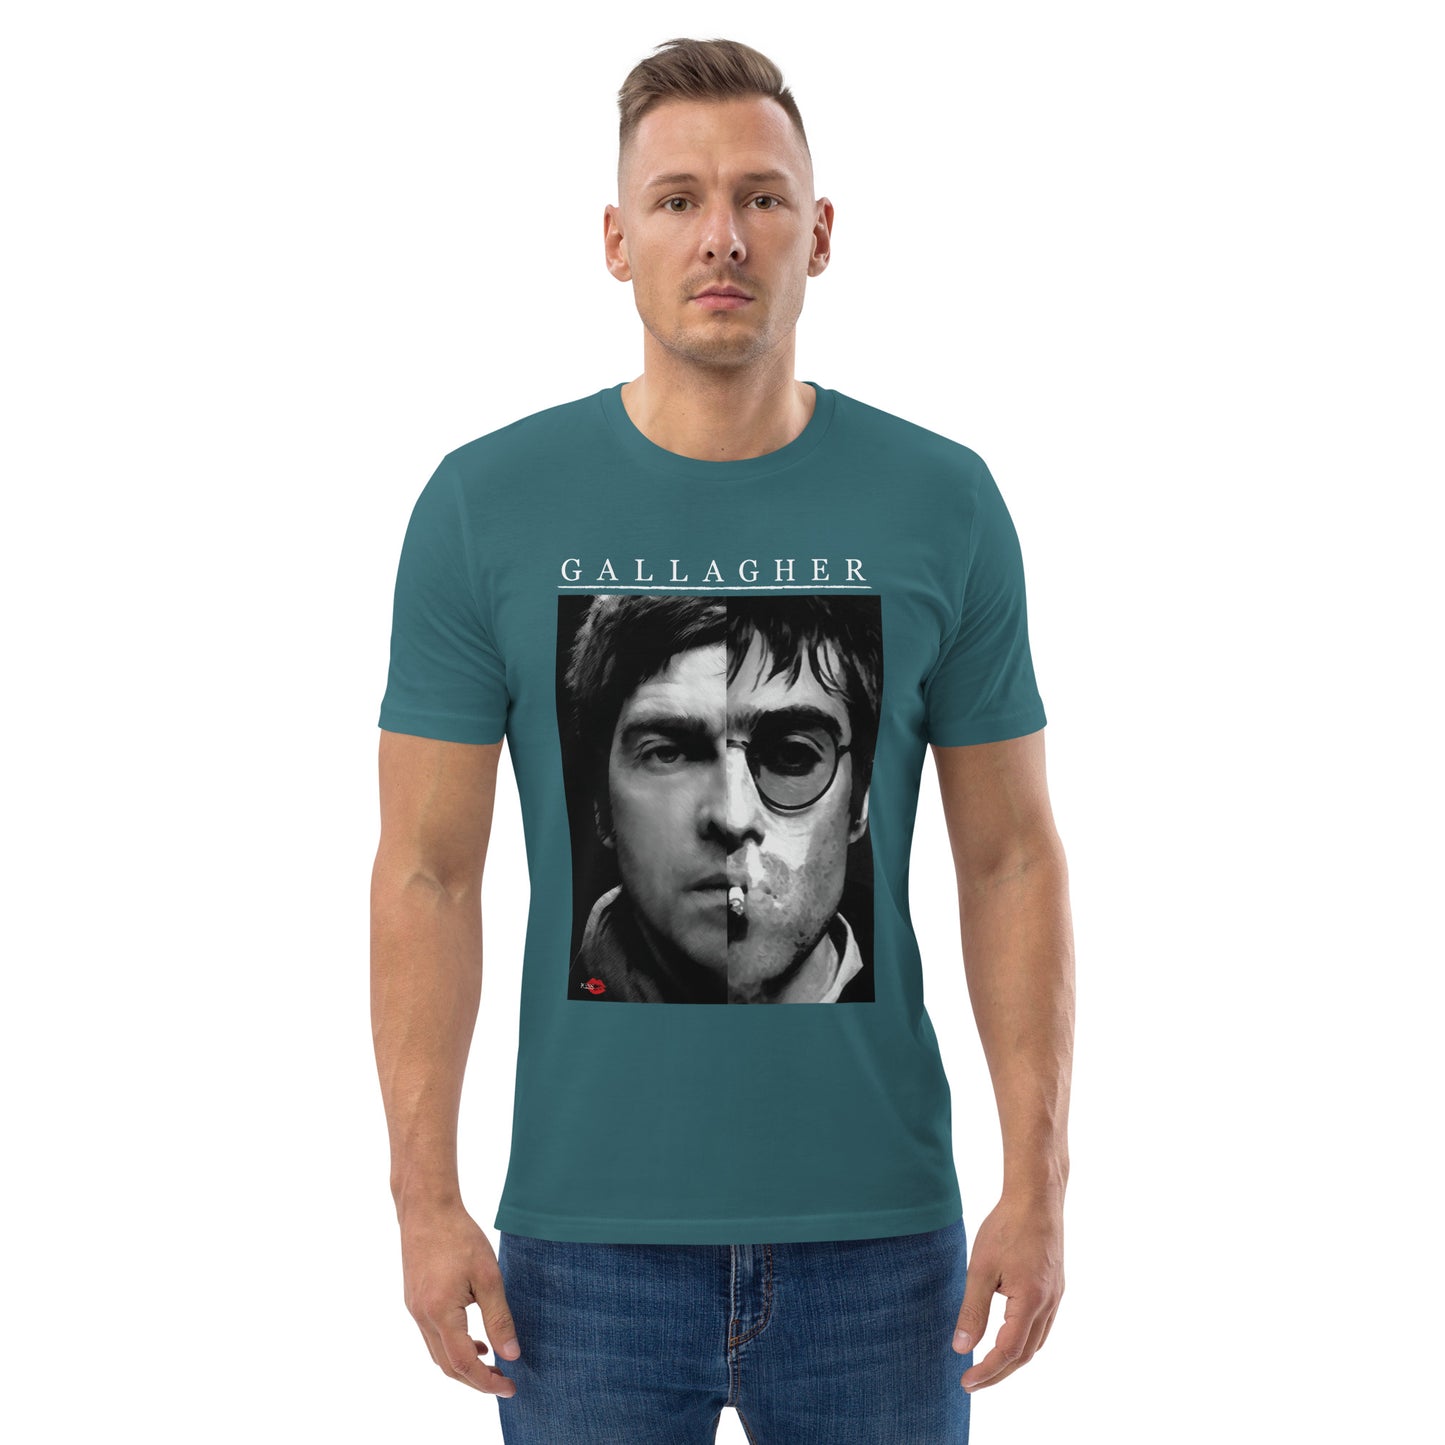 Gallagher Brothers KiSS Unisex organic cotton t-shirt - Noel and Liam Oasis inspired Music, indie - Rock N Roll Star